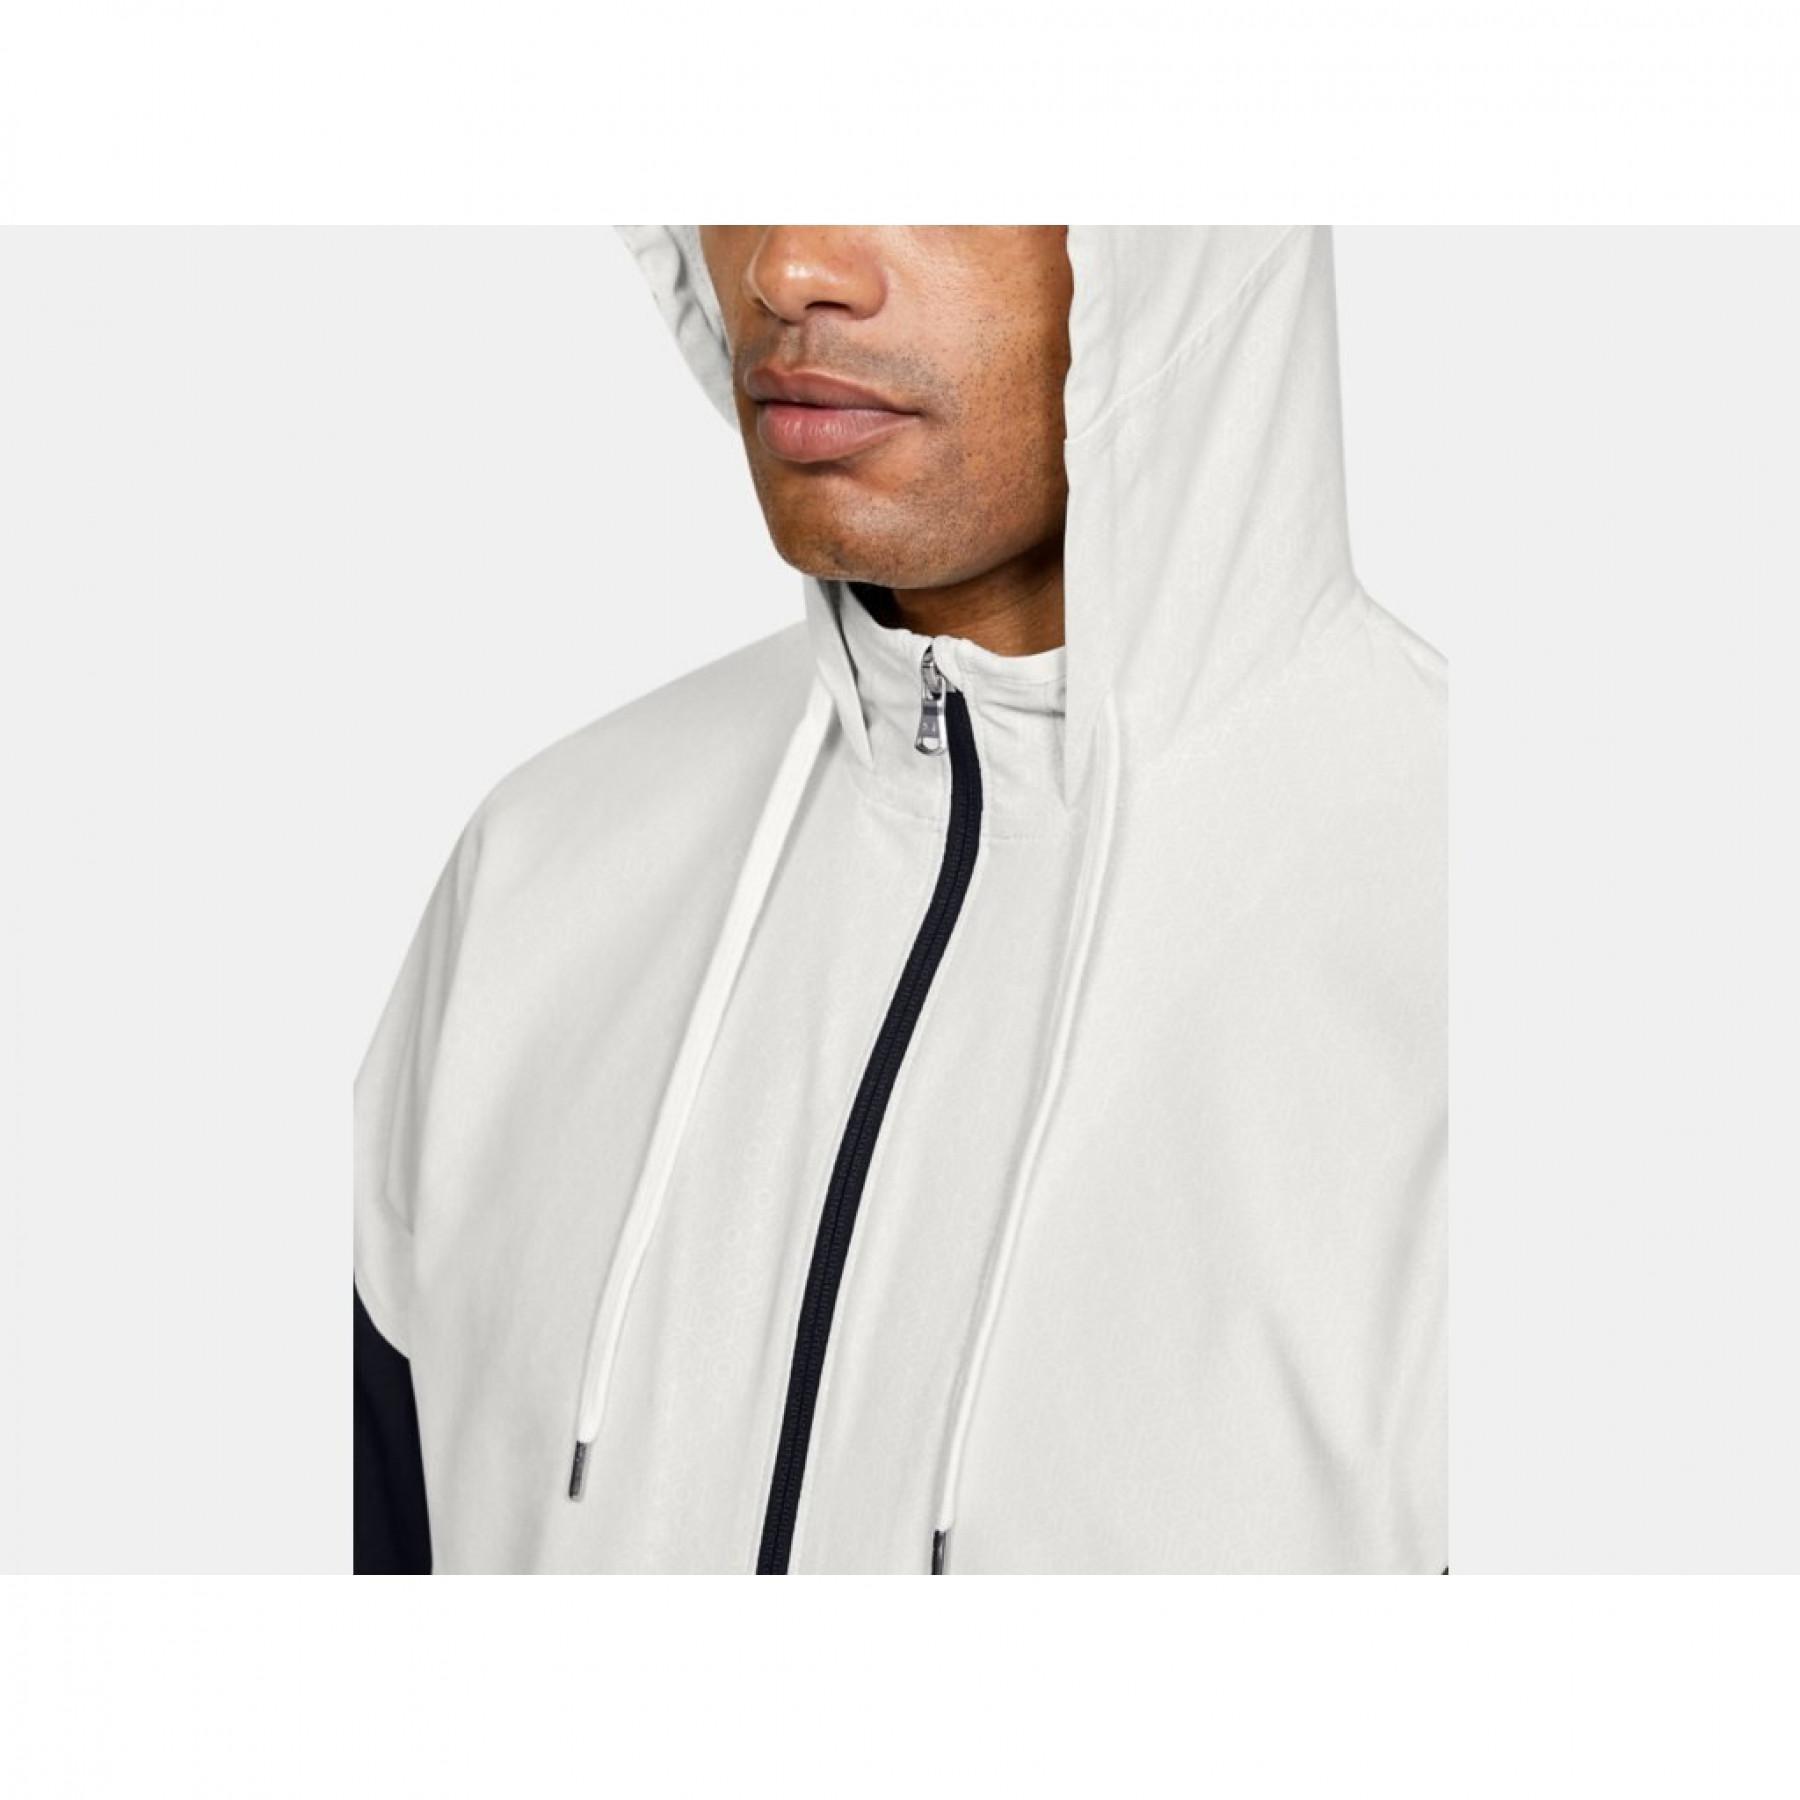 Chaqueta Under Armour Recover Woven Warm-Up